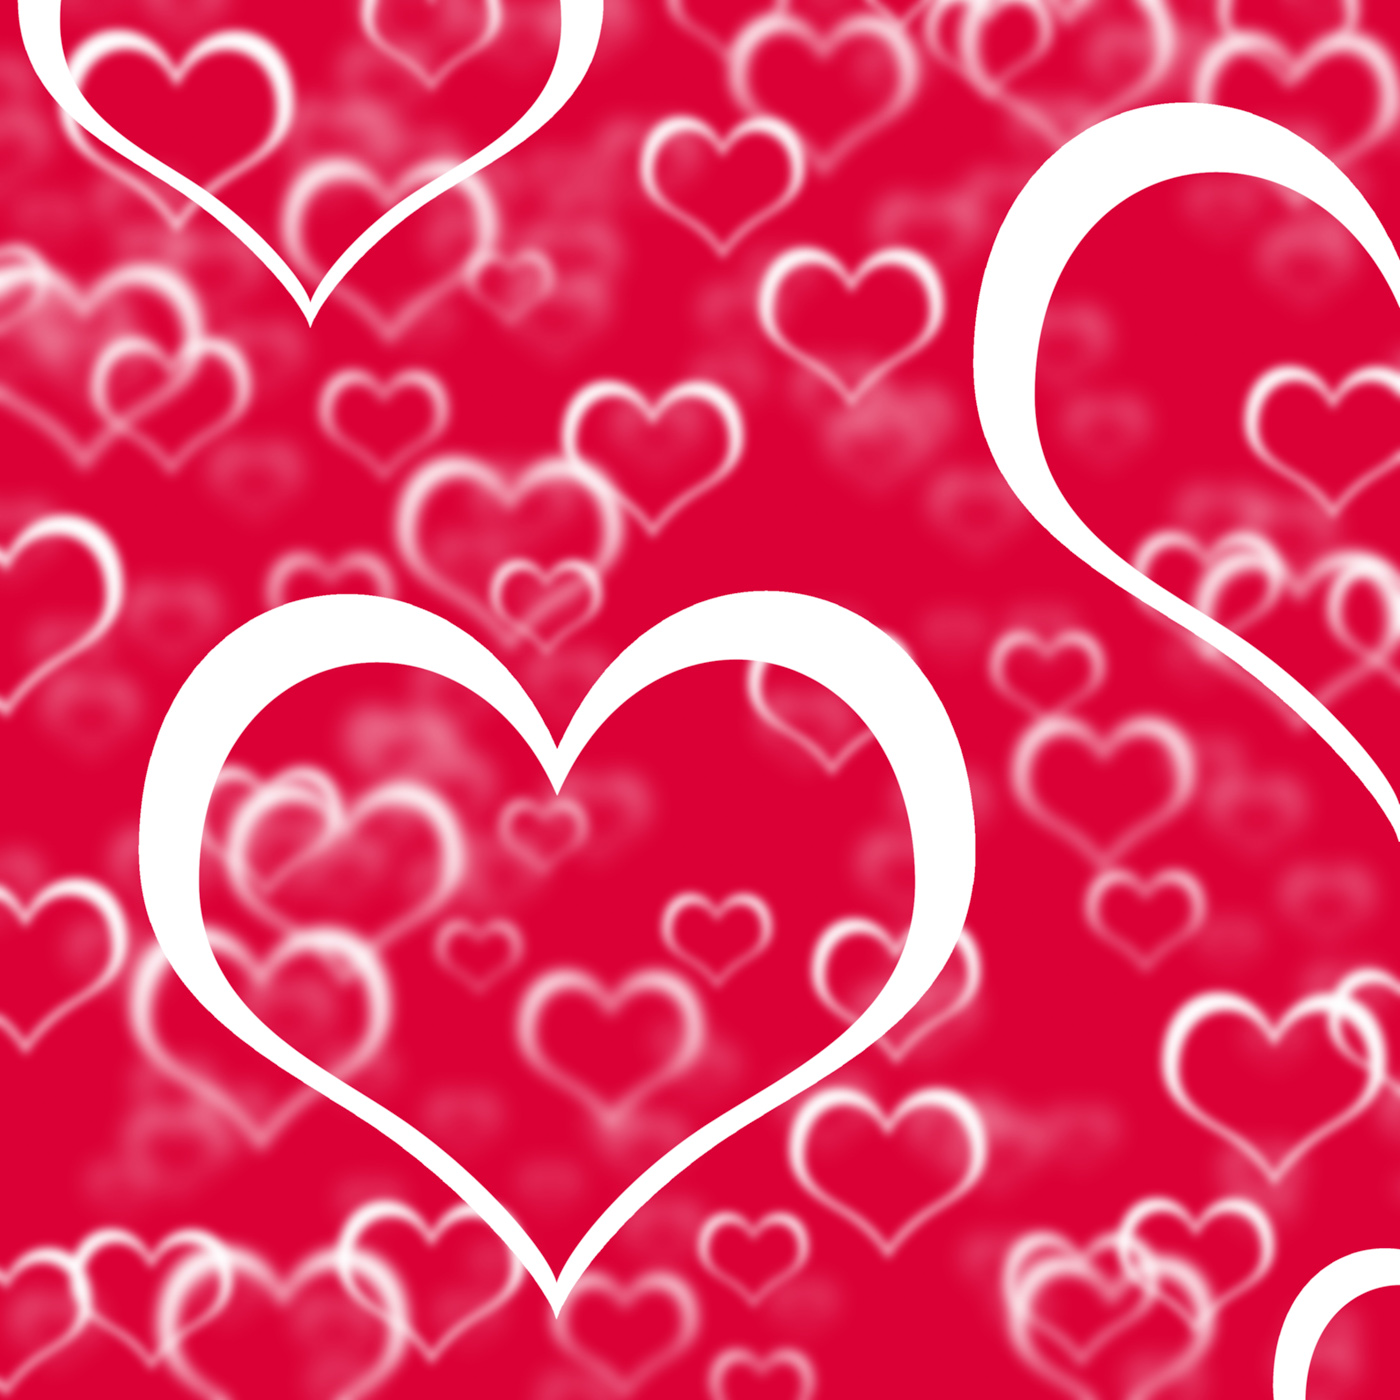 Red hearts background showing love romance and valentines photo